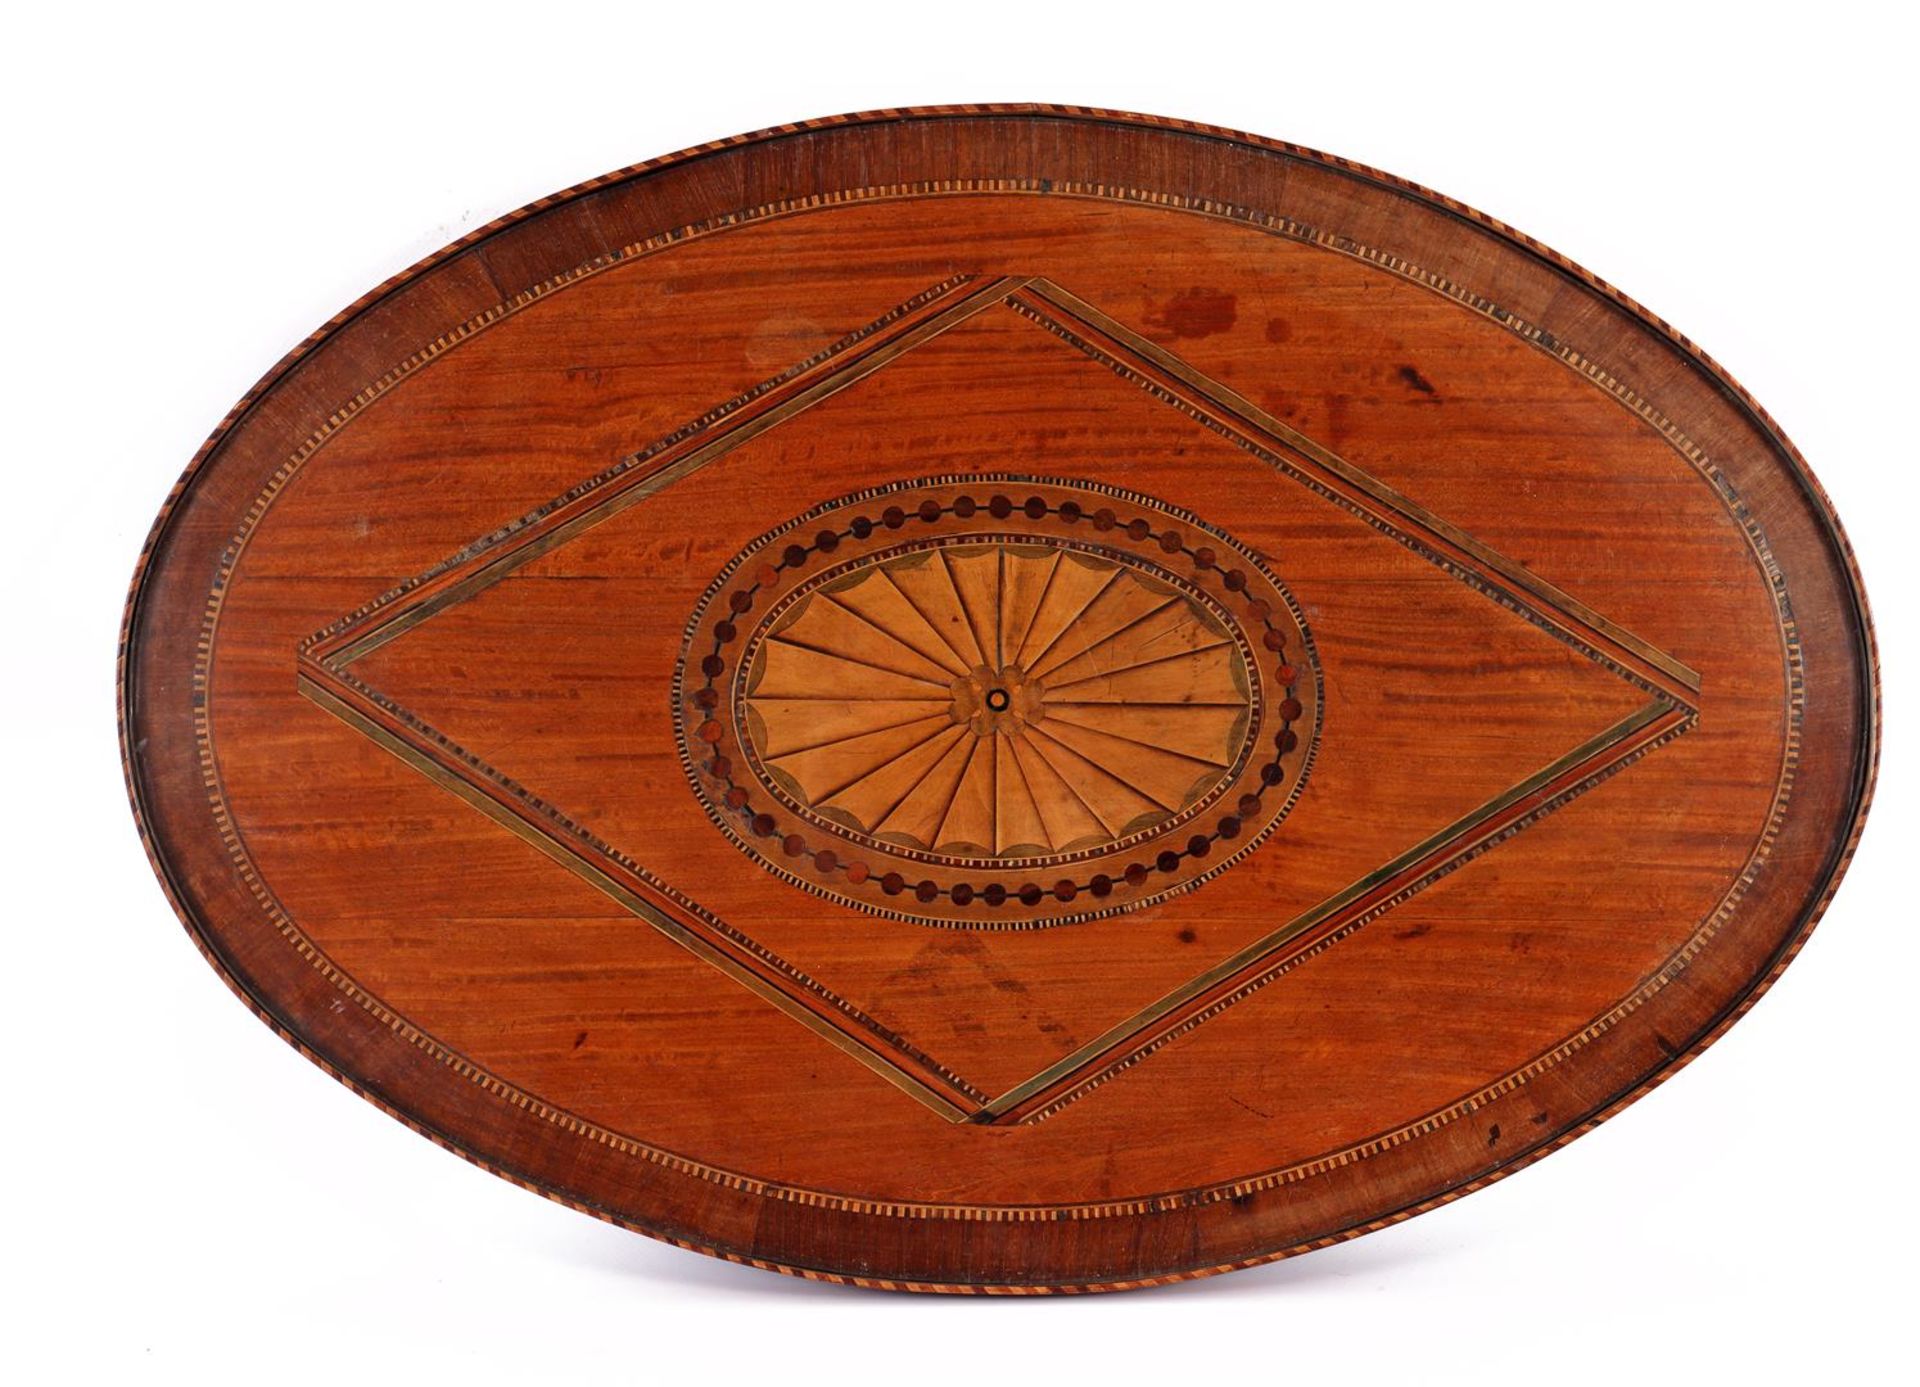 Oval tray with beautiful inlay work